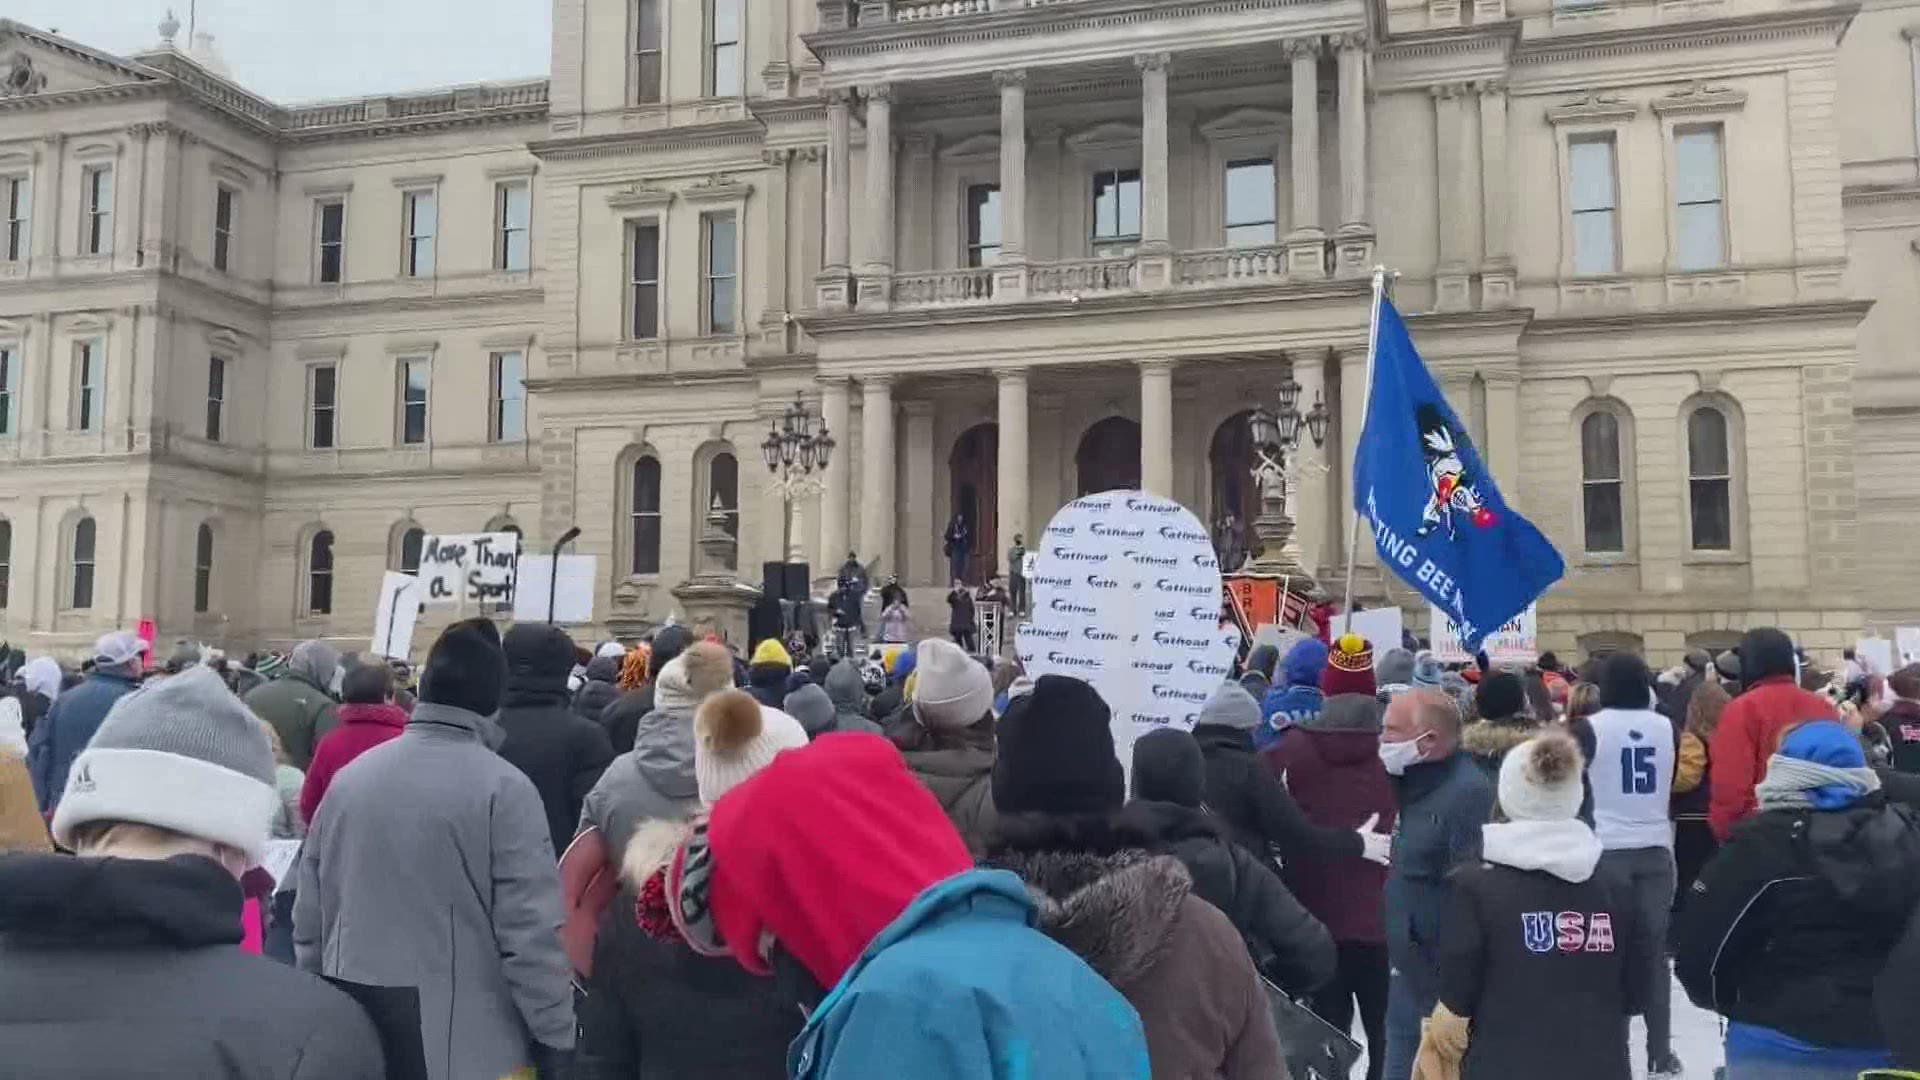 The press conference comes after hundreds marched on the State Capitol over the weekend.